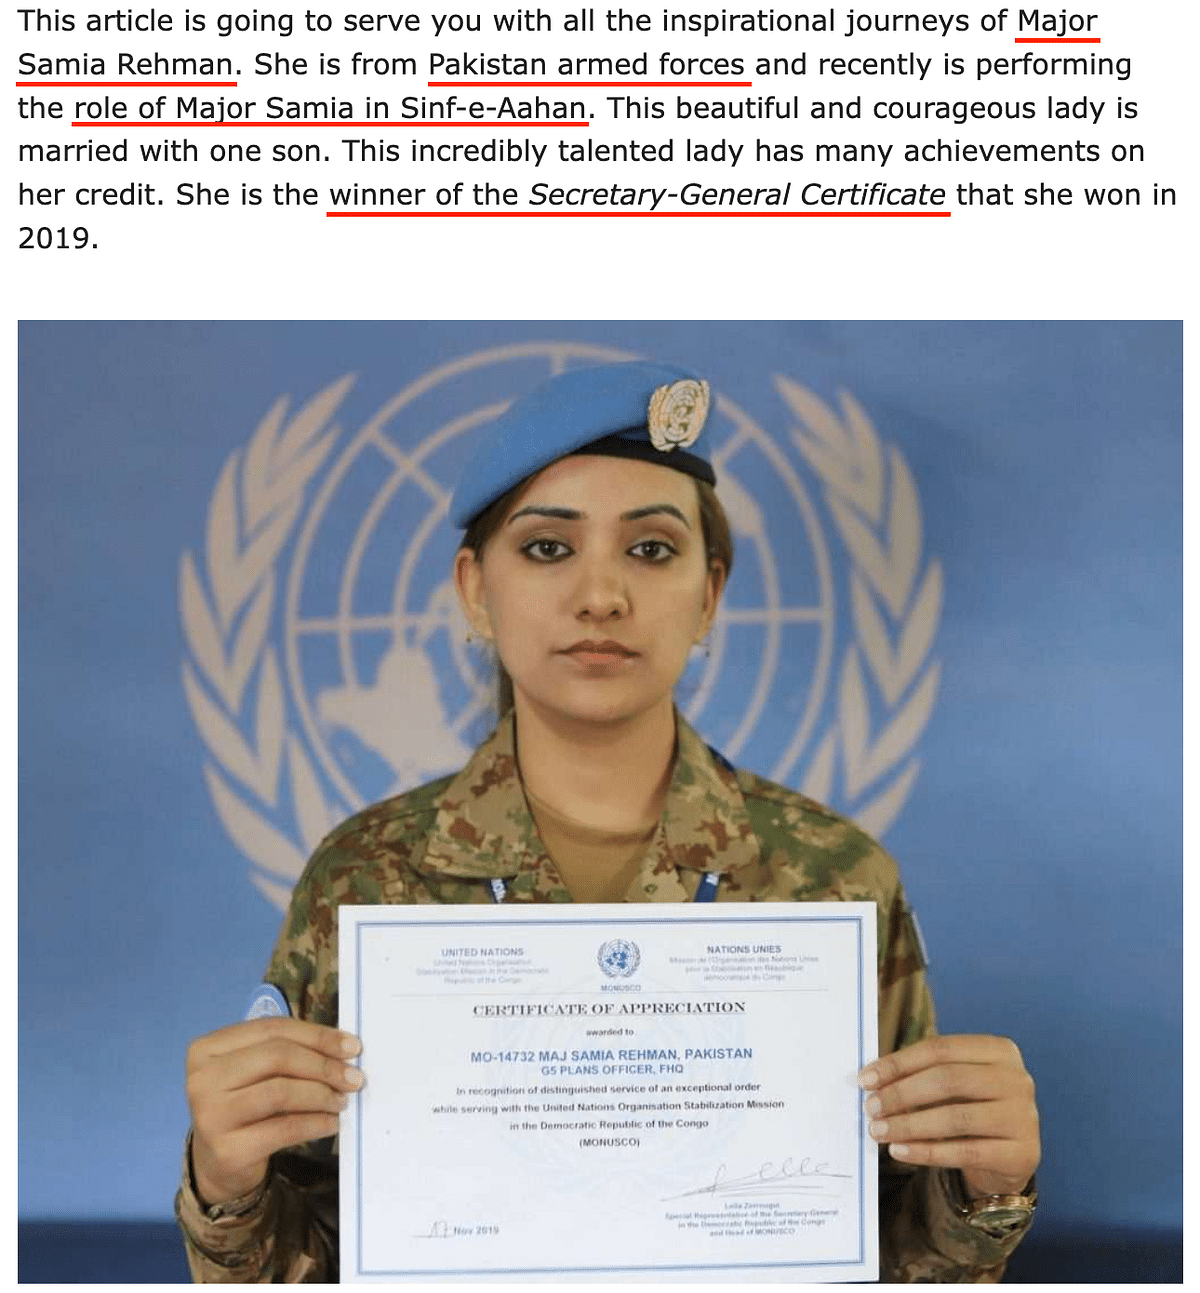 The woman in a military uniform is Major Samia  Rehman, who has served in the United Nations Peacekeeping Force.